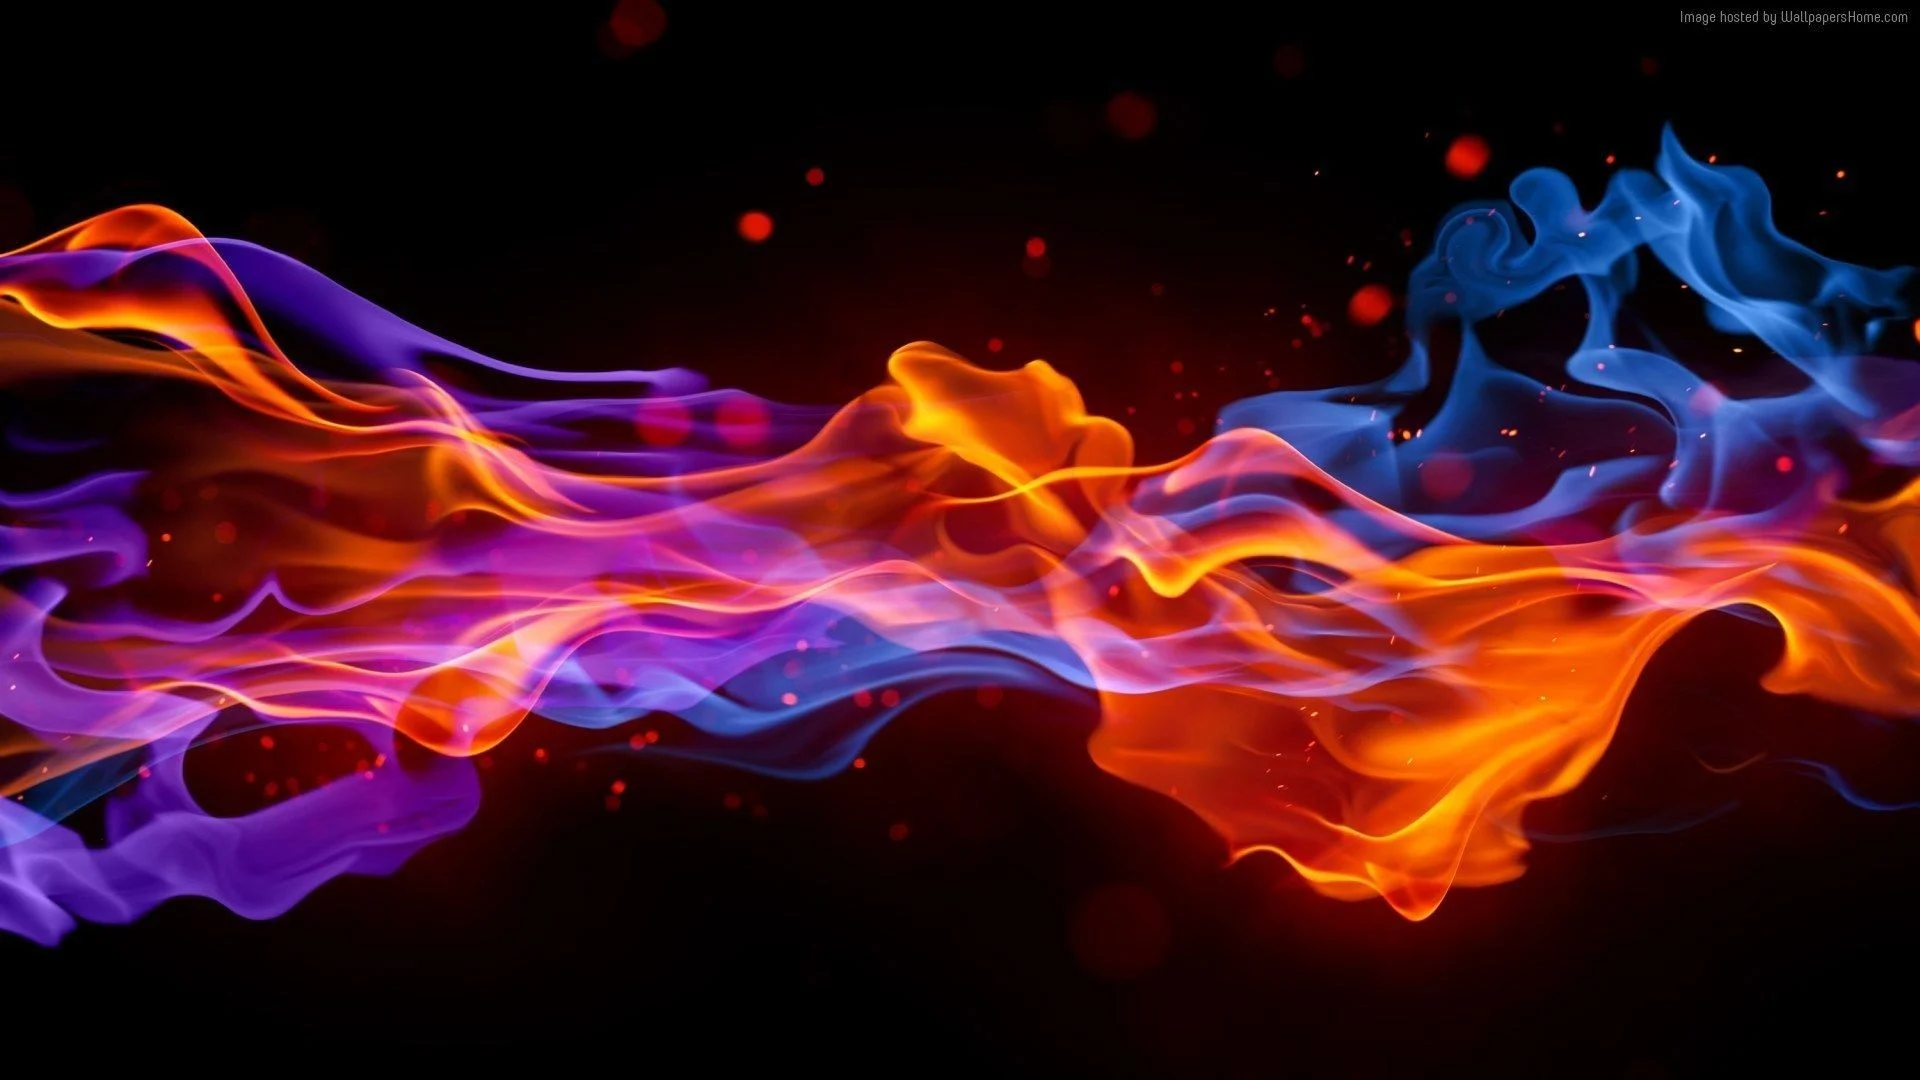 Fire Wallpapers HD Fire Backgrounds Free Images Download